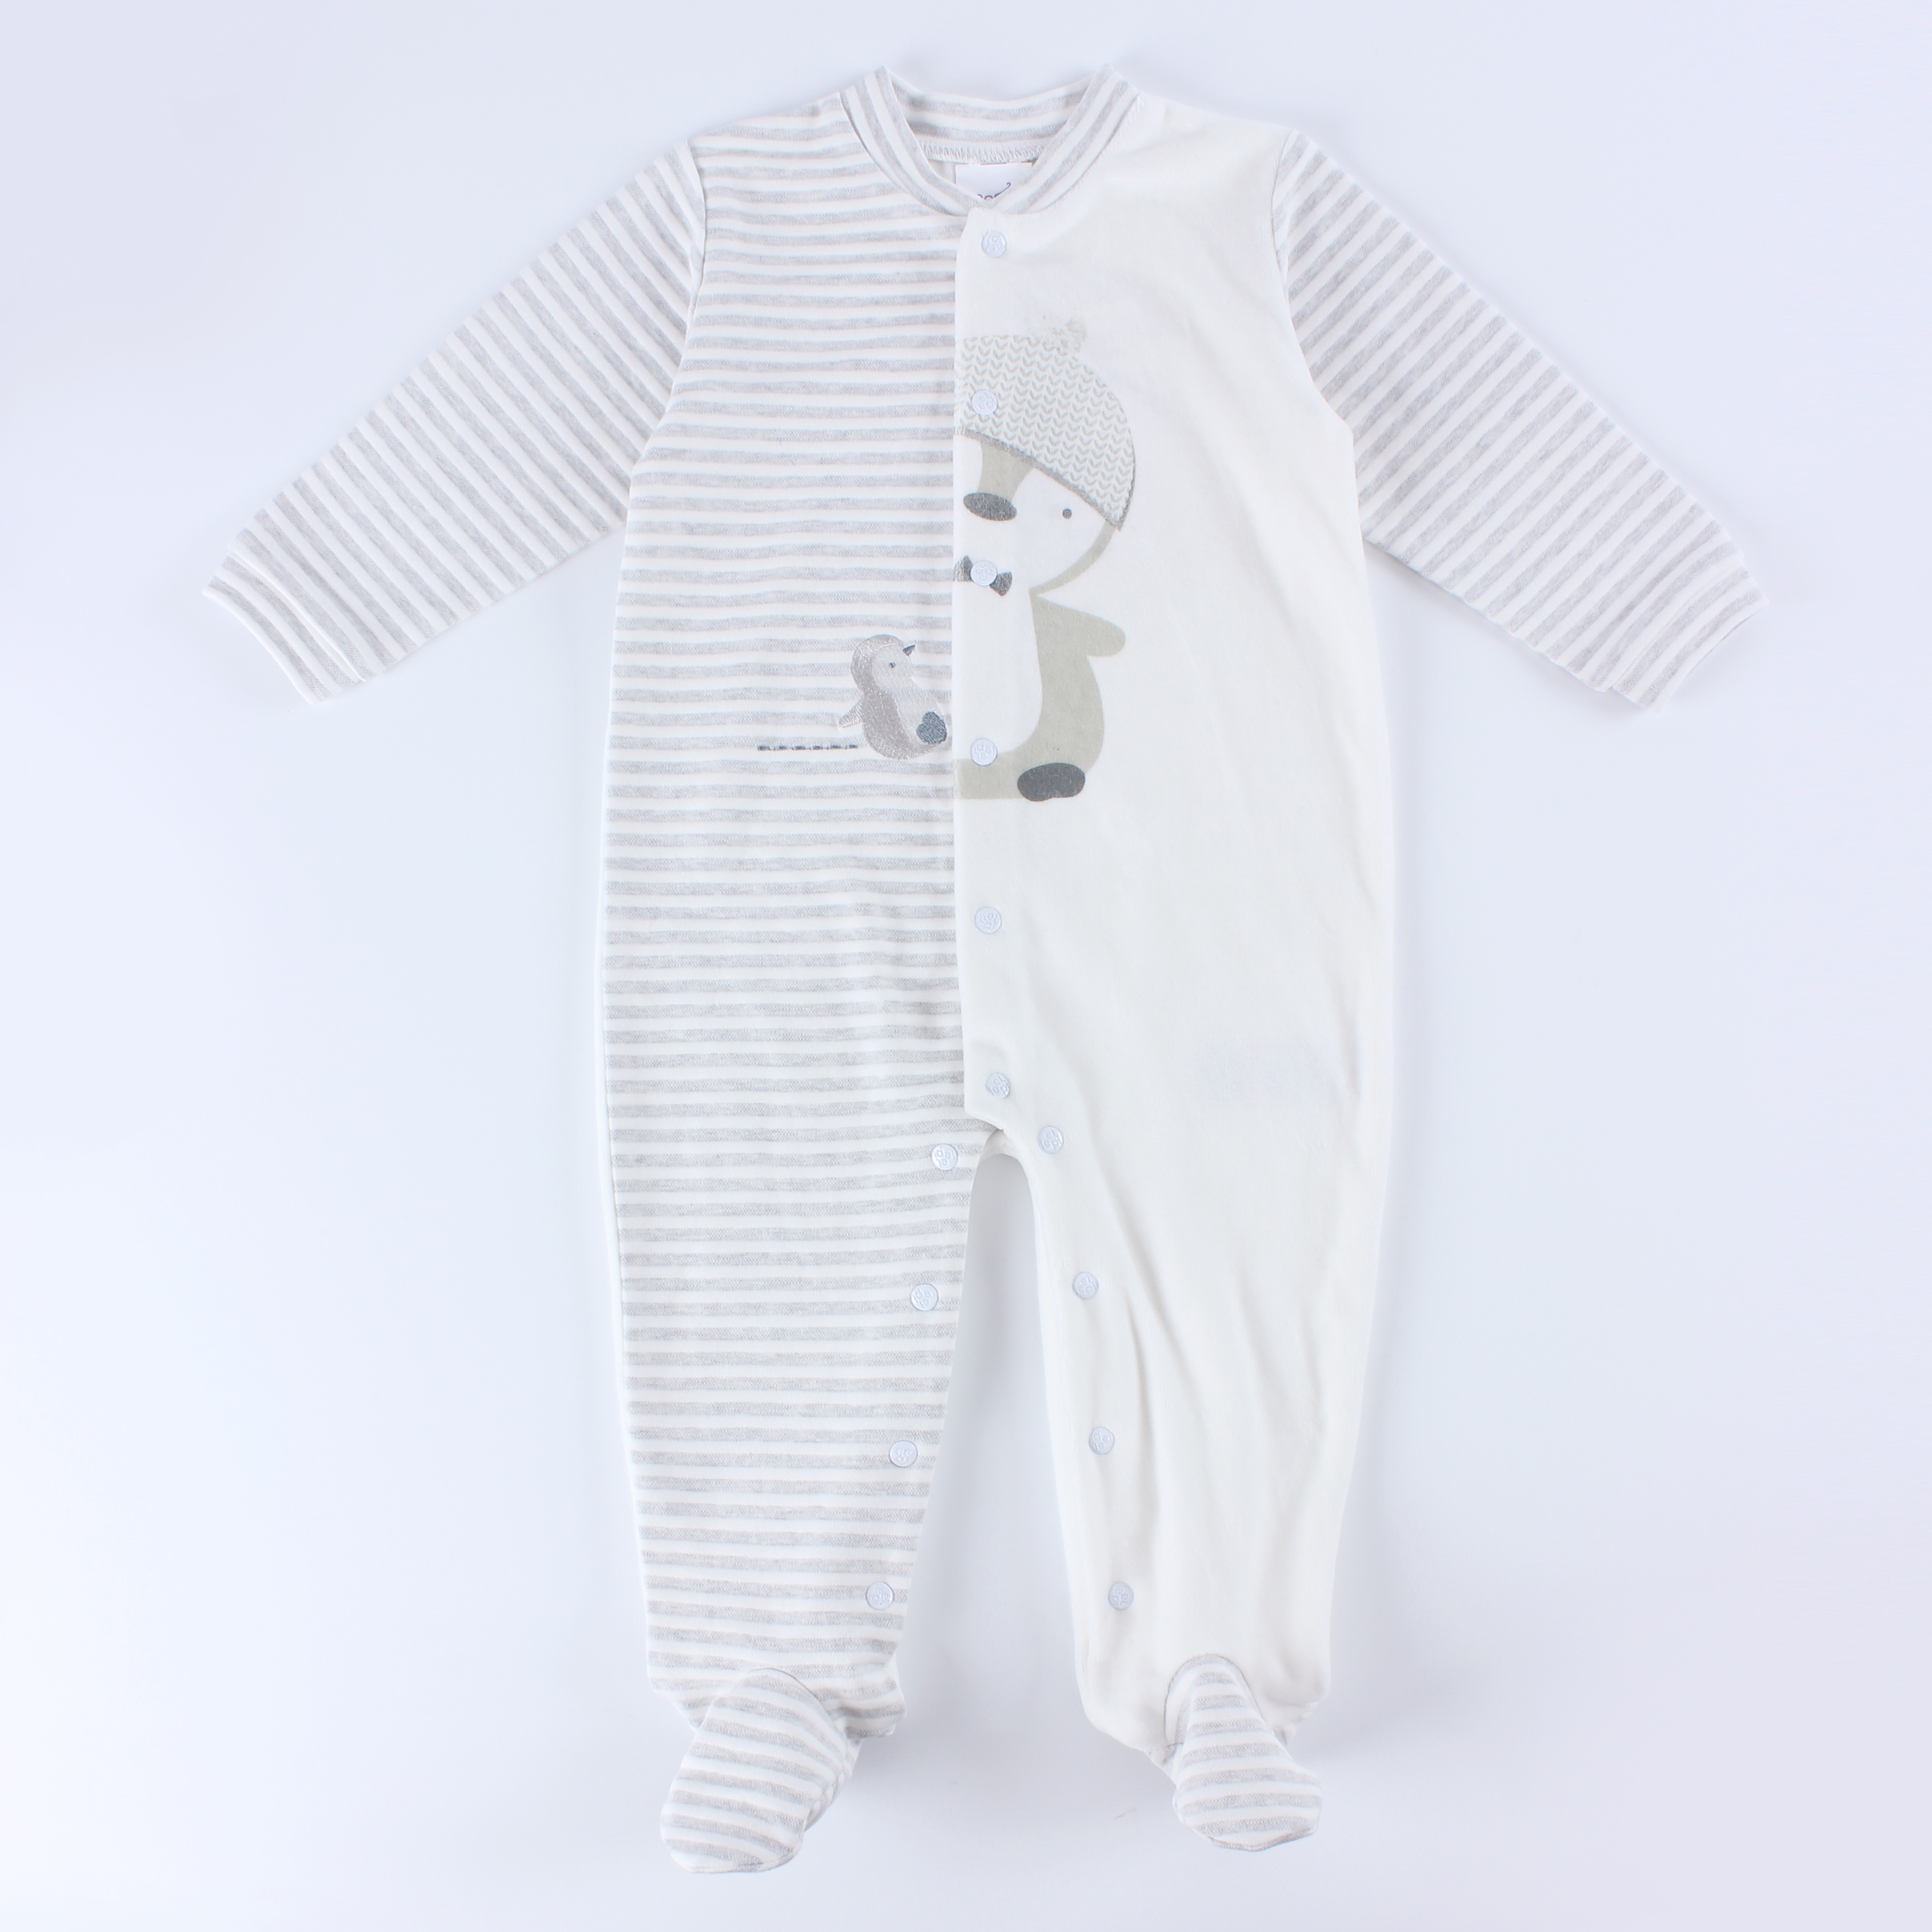 BQ 3099 Customizable Baby Romper With Buttons